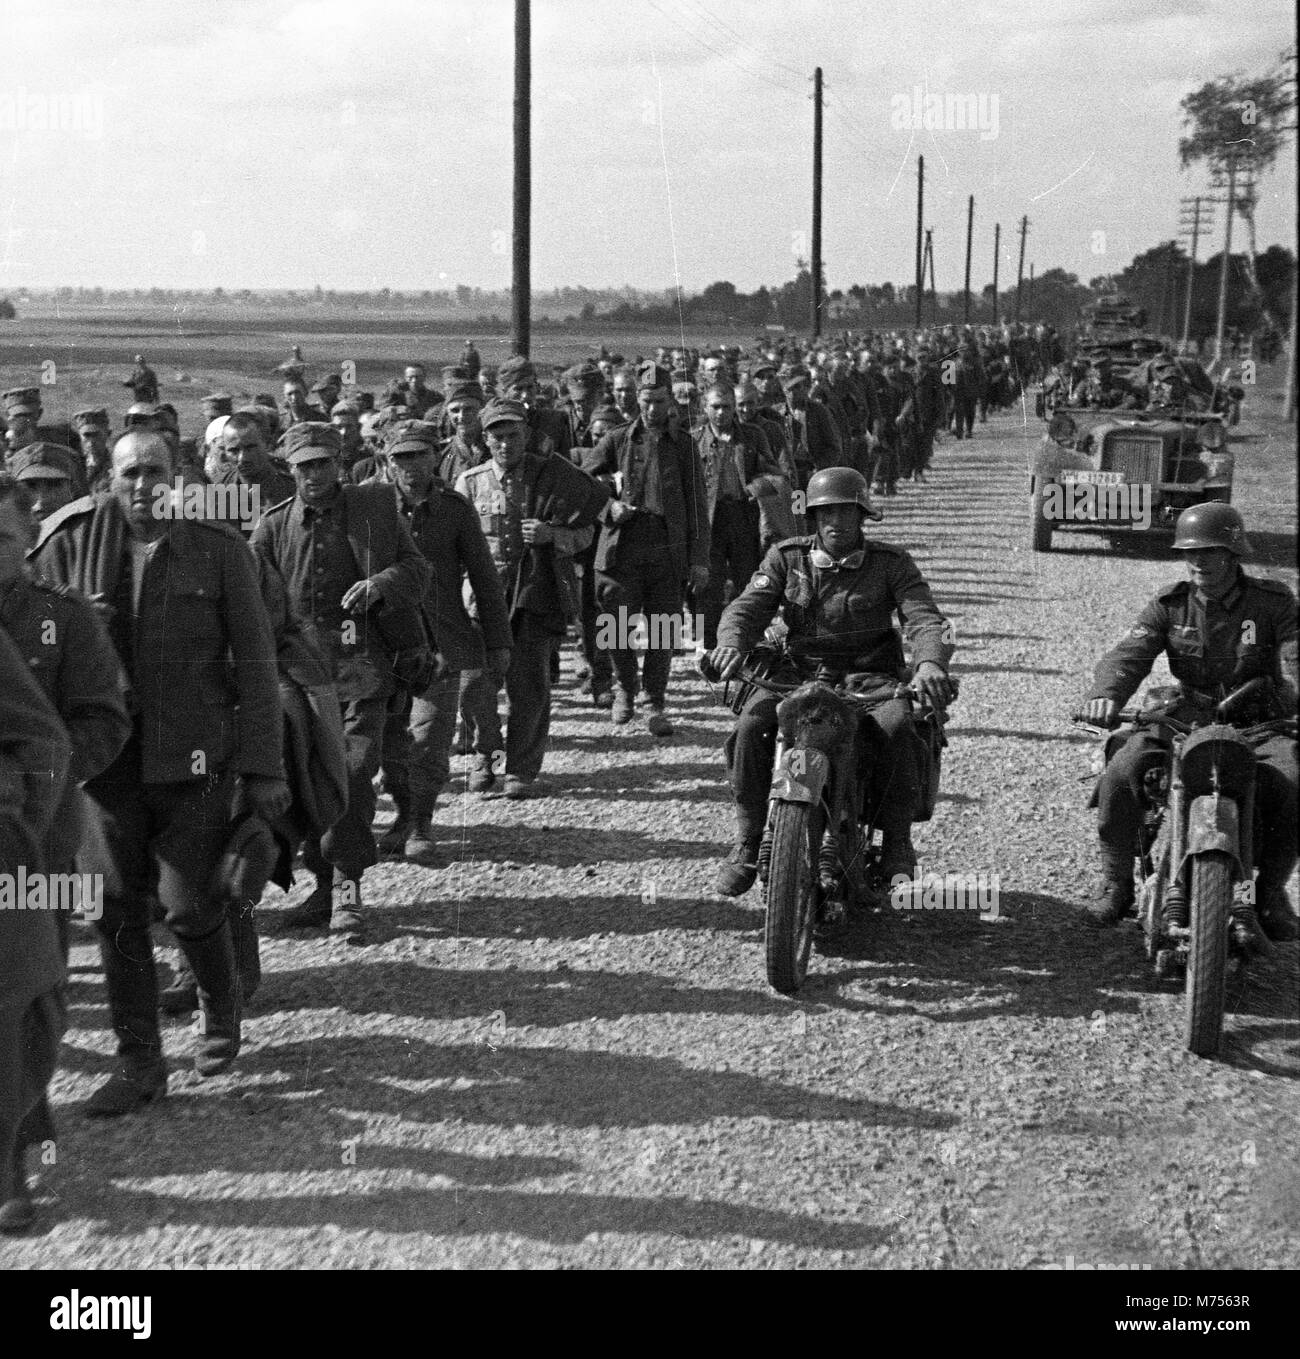 1939 WW2 Polish prisoners of war escorted by German soldiers near Lviv/Lwow during German invasion of Poland. Stock Photo